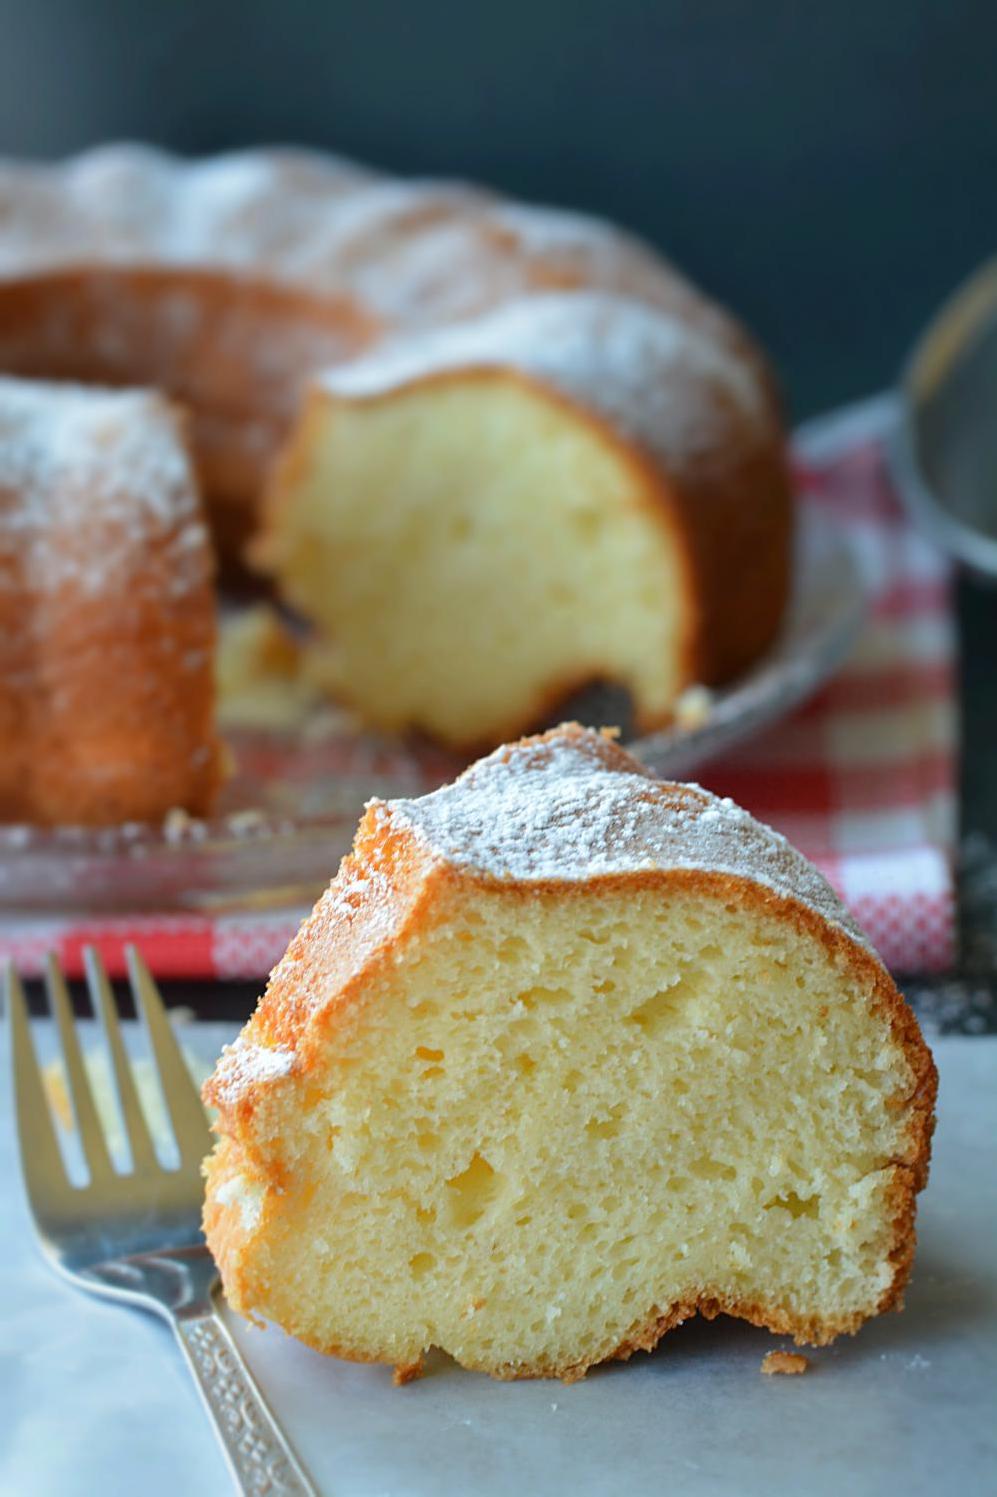  Every bite of this moist and buttery cake will remind you of your grandma's homemade baking.